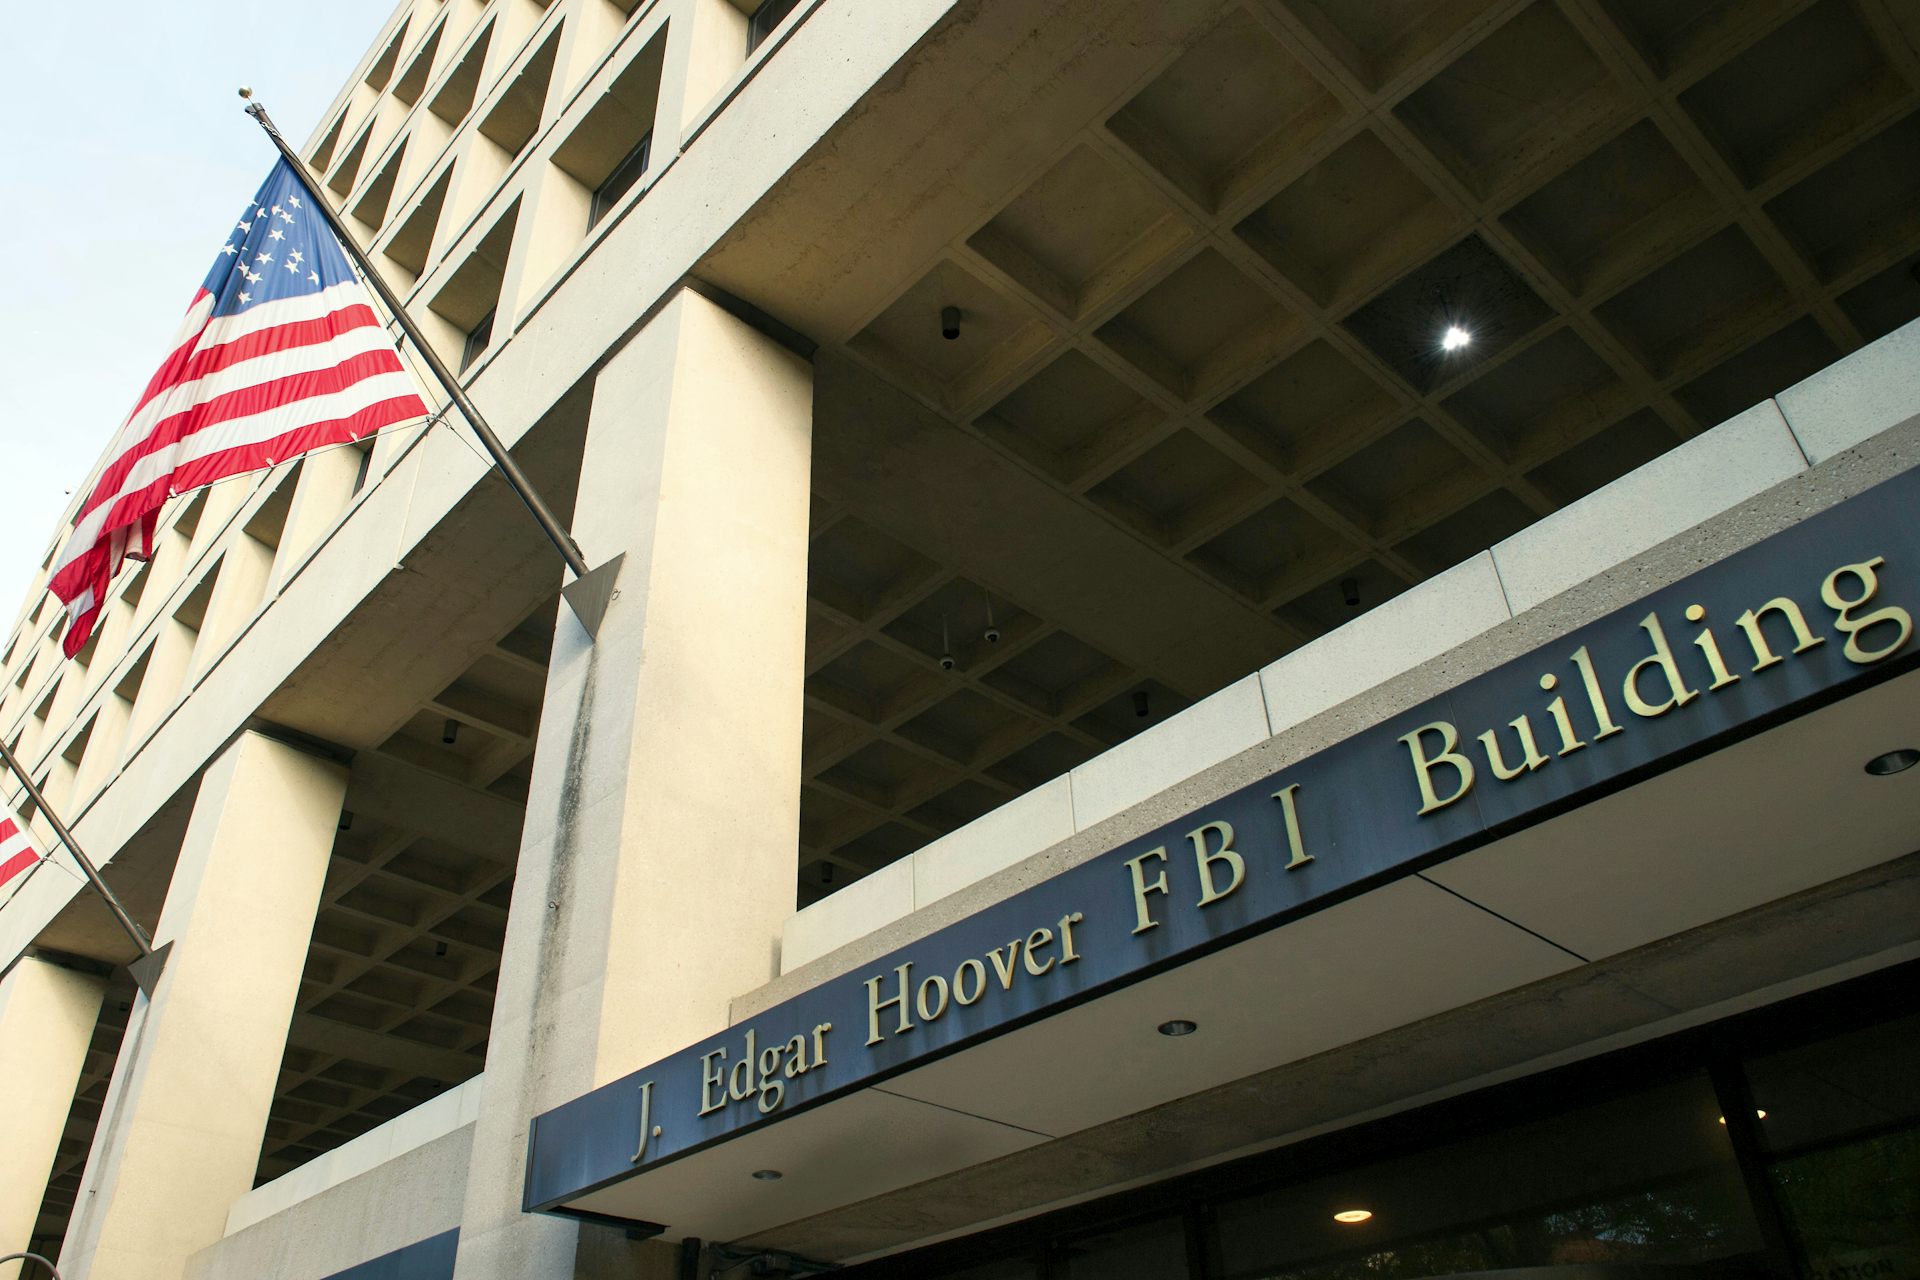 The Fbi Is Breaking into Corporate Computers to Remove Malicious Code – Smart Cyber Defense or Government Overreach?